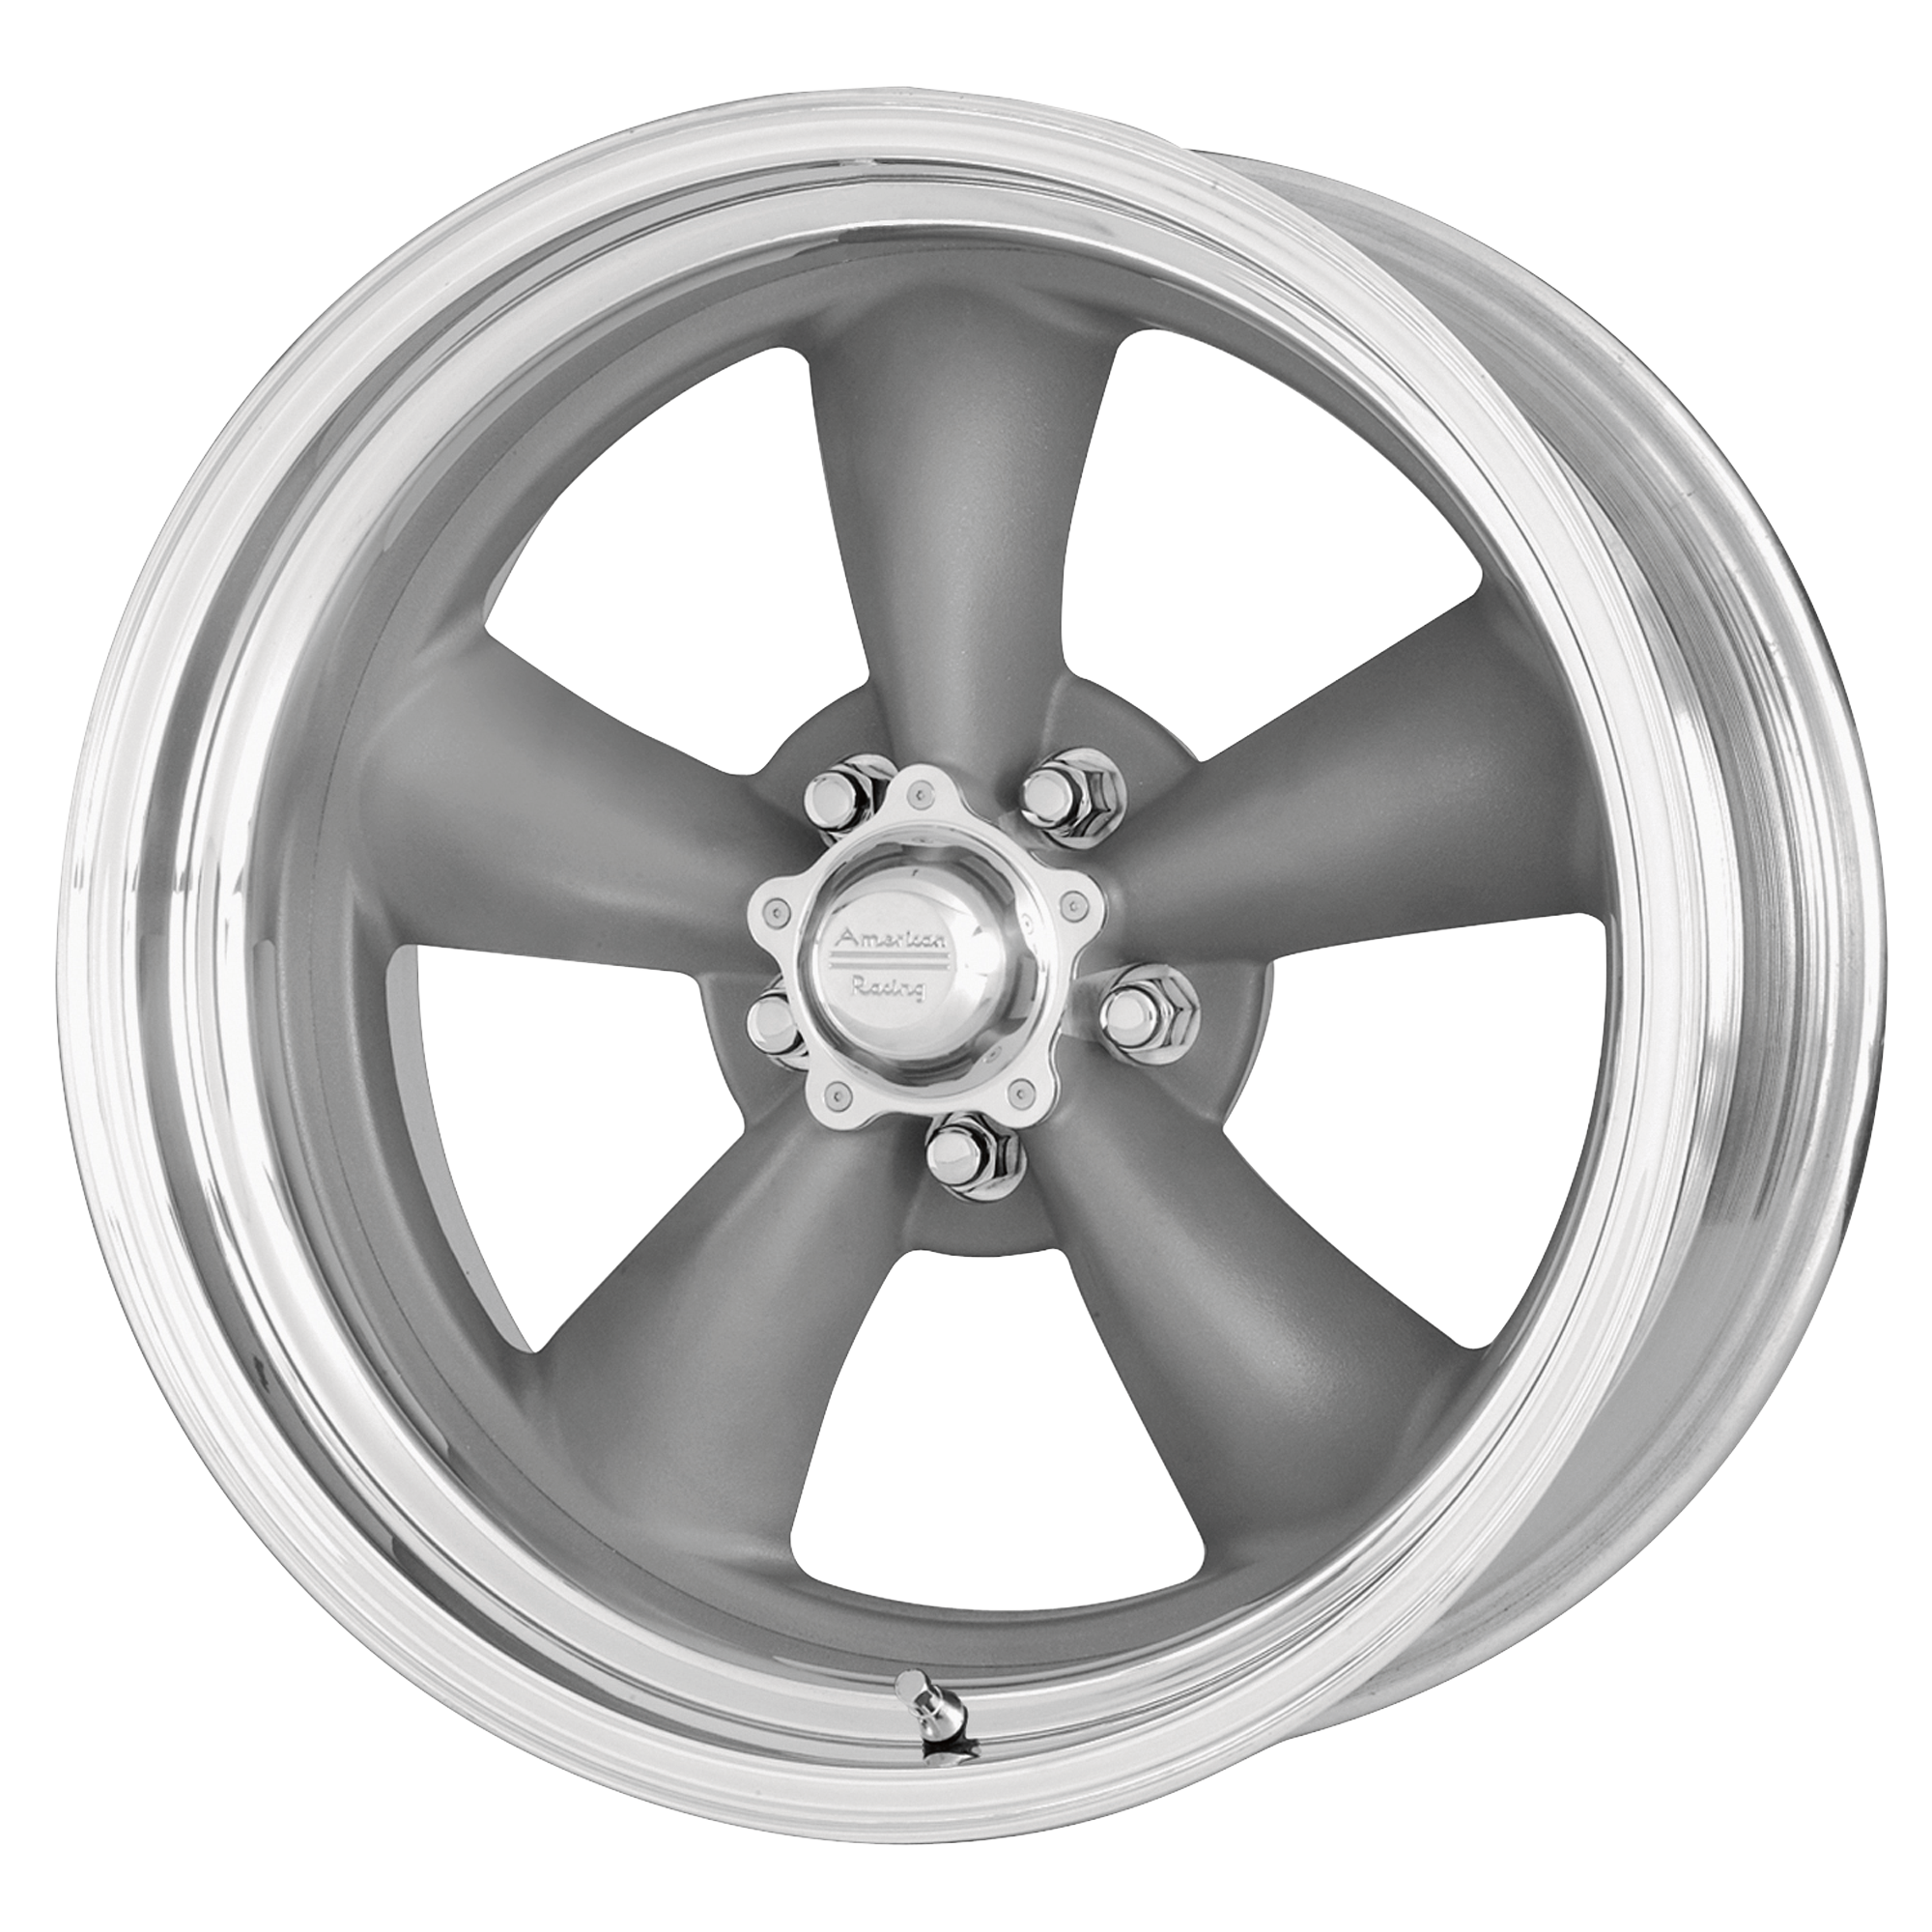 CLASSIC TORQ THRUST II ONE PIECE 15x10 5x120.65 MAG GRAY W/ MACHINED LIP (-44 mm) - Tires and Engine Performance